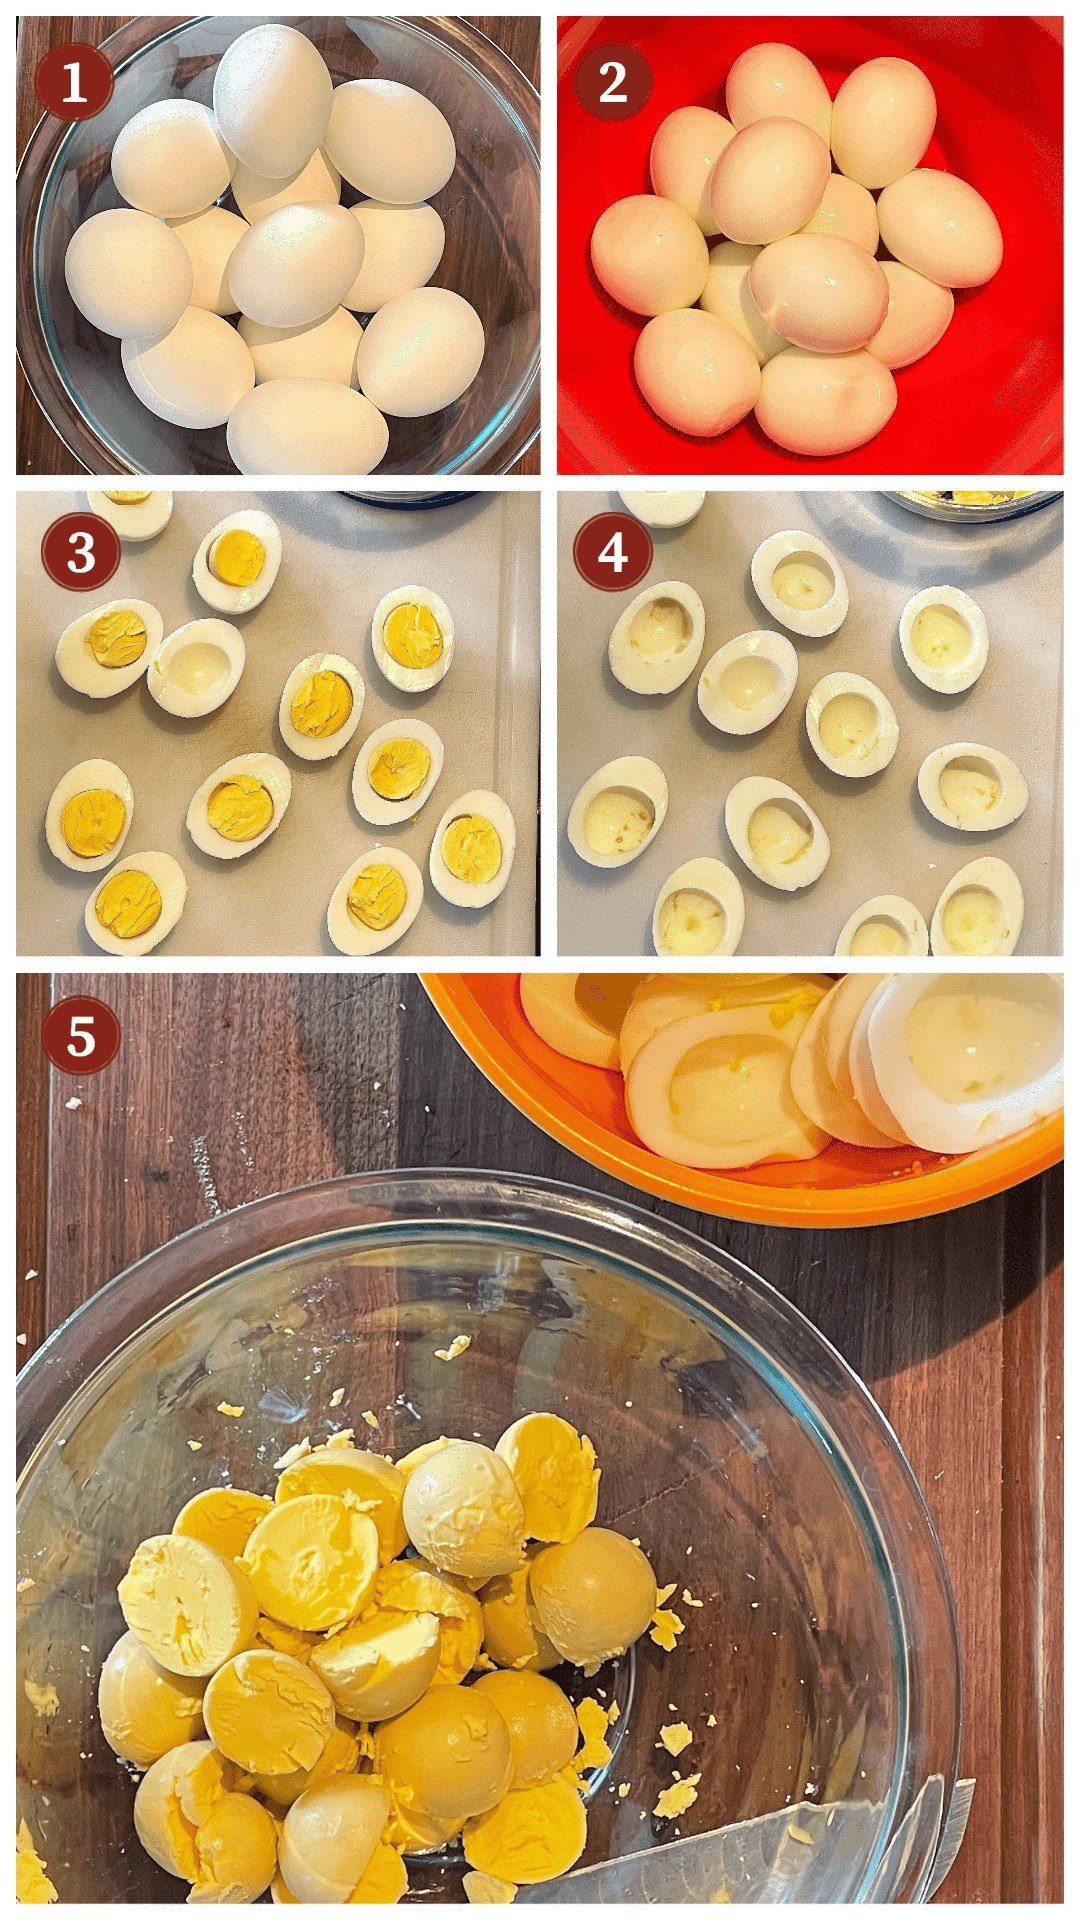 A collage of images showing how to make deviled eggs, steps 1 - 6.